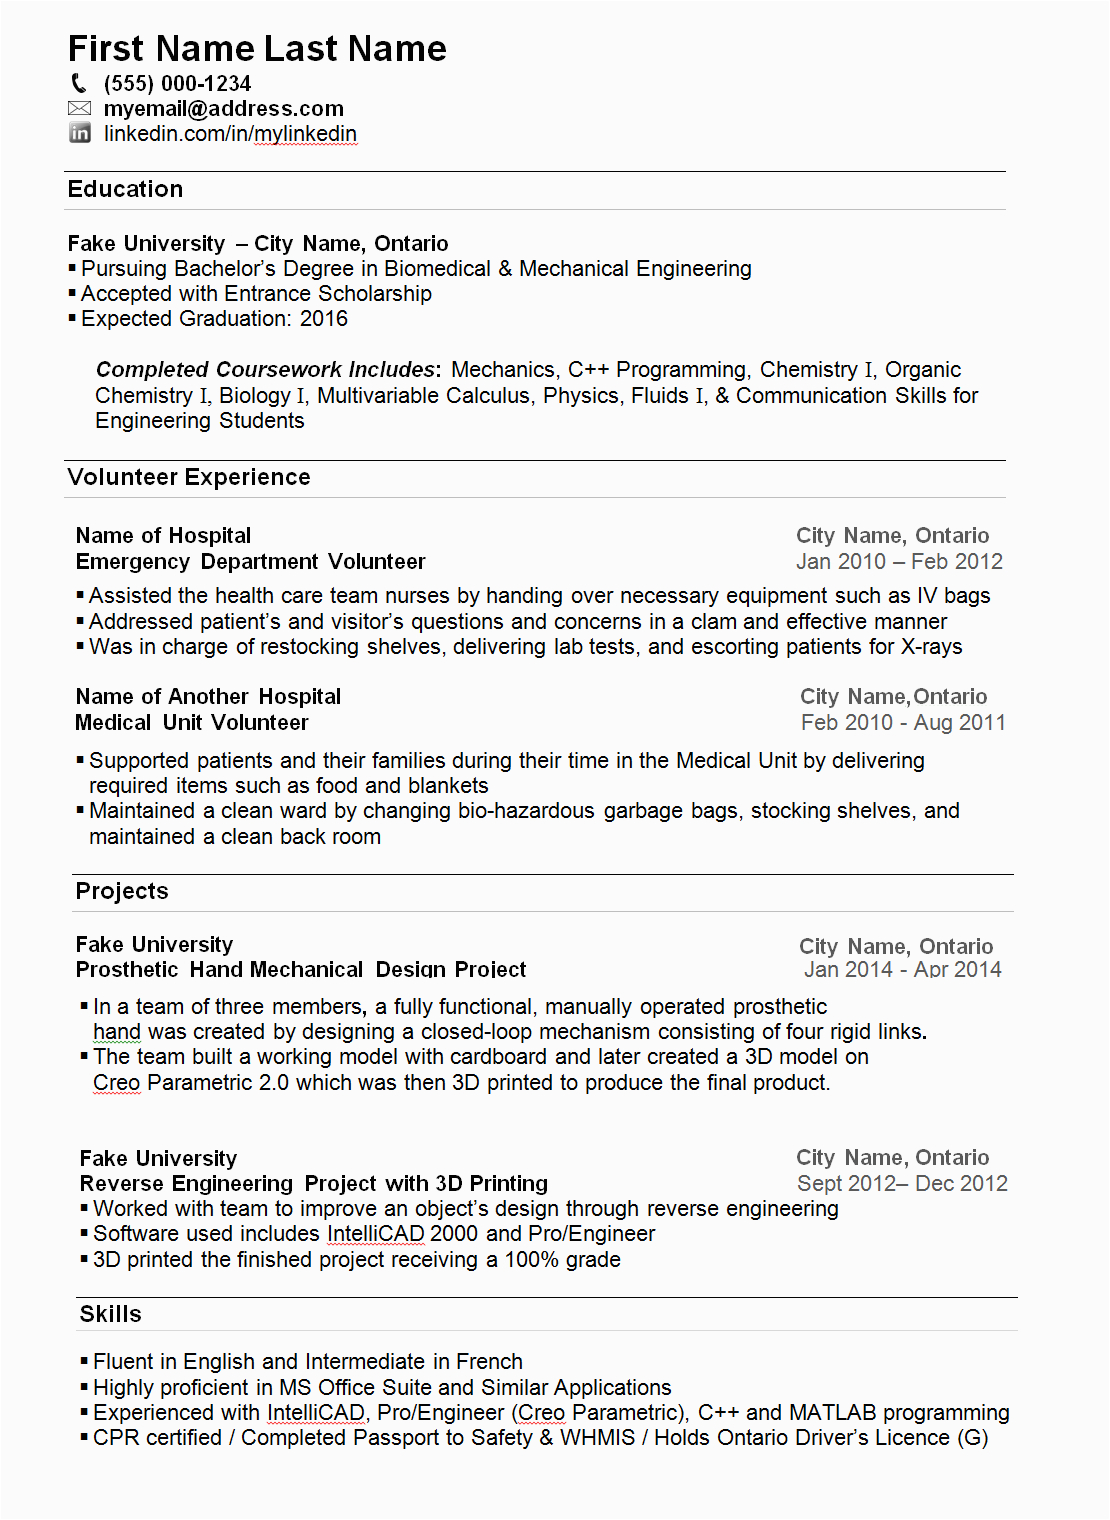 Sample Resume for Summer Job College Student Please Critic My Resume I M A College Student Looking for